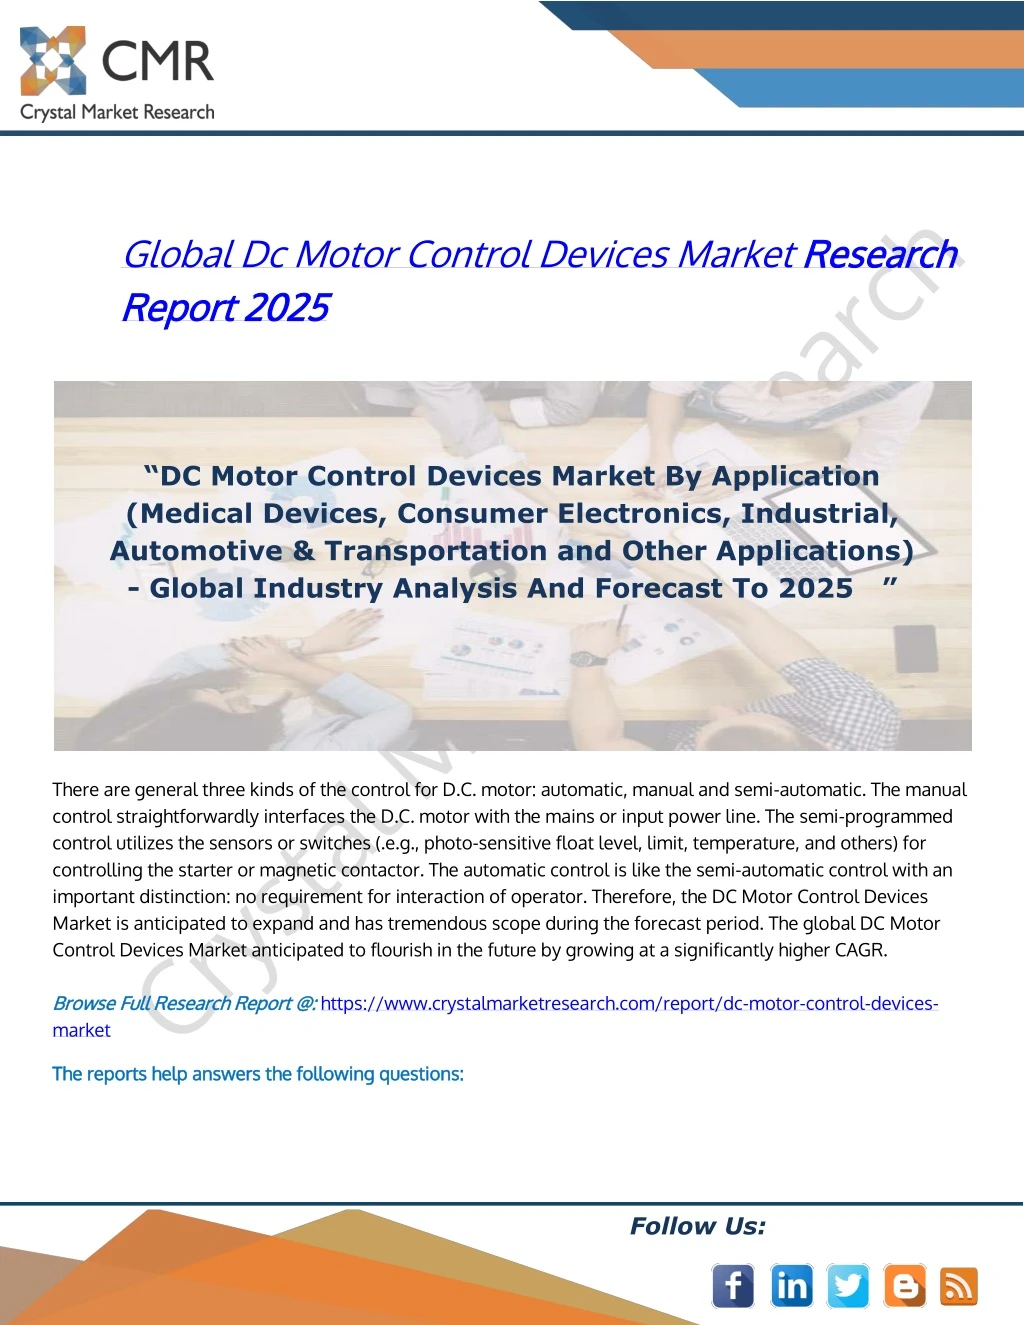 global dc motor control devices market research